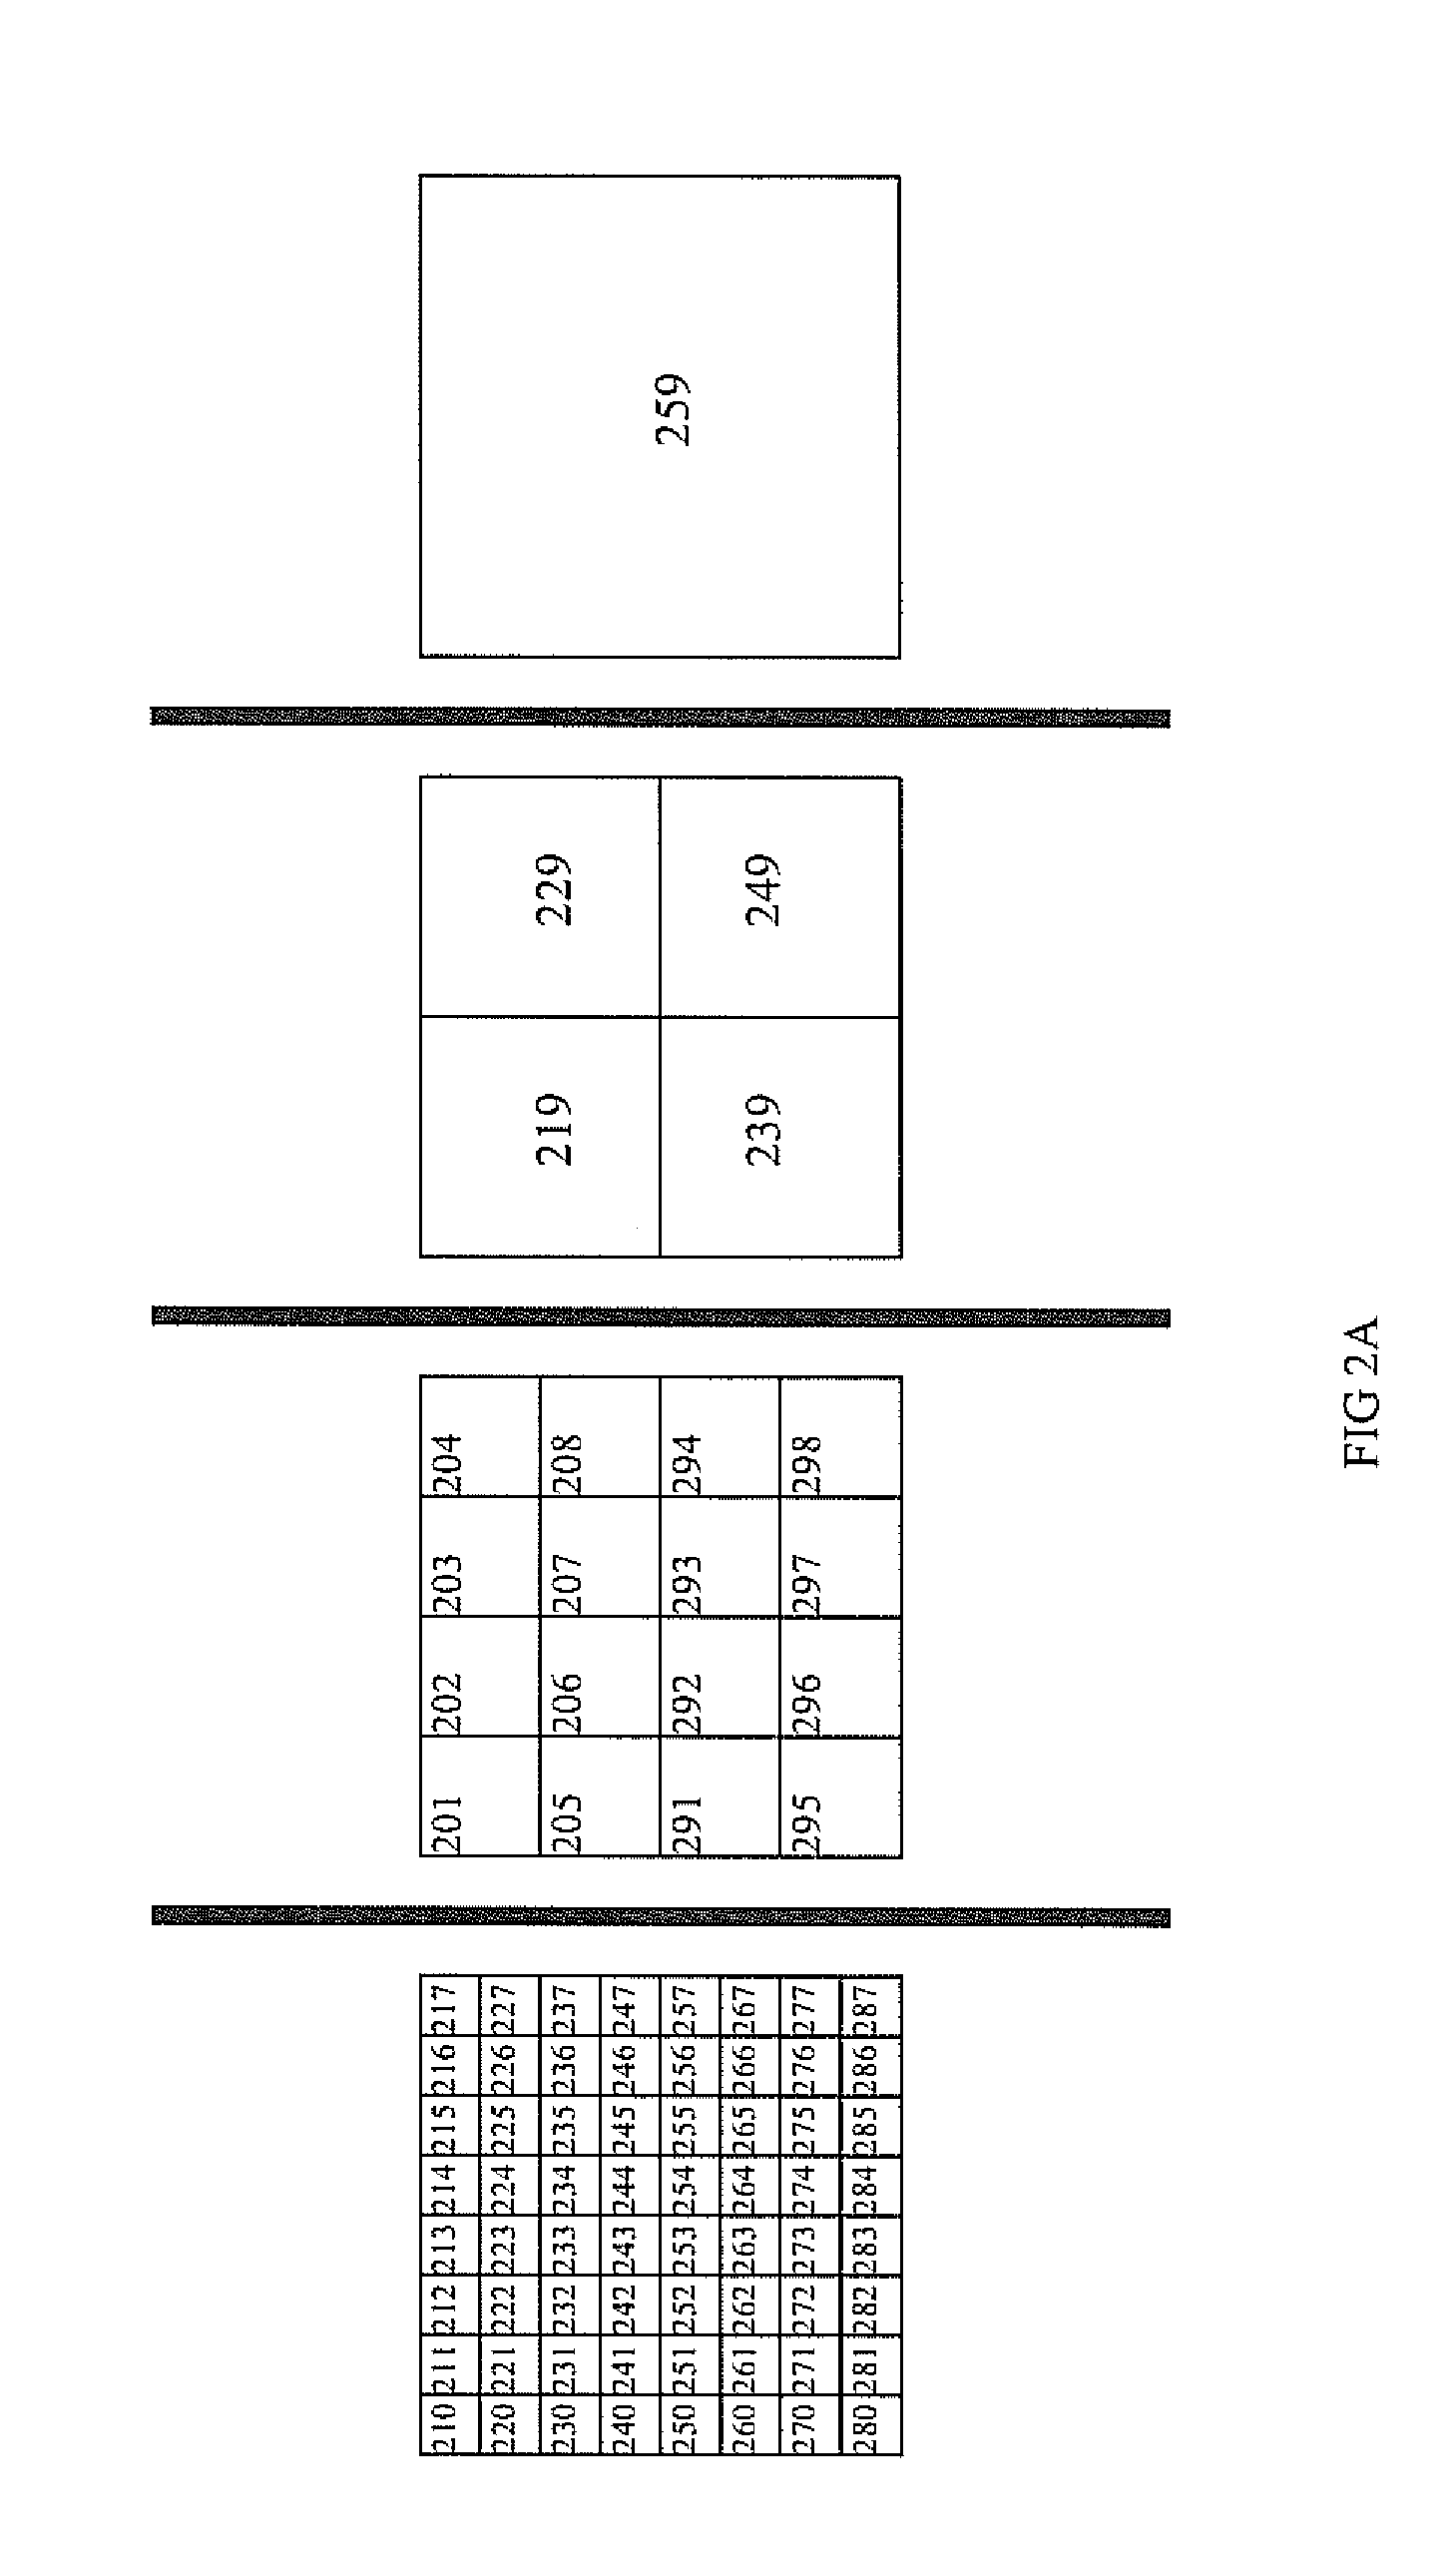 Sparse texture systems and methods